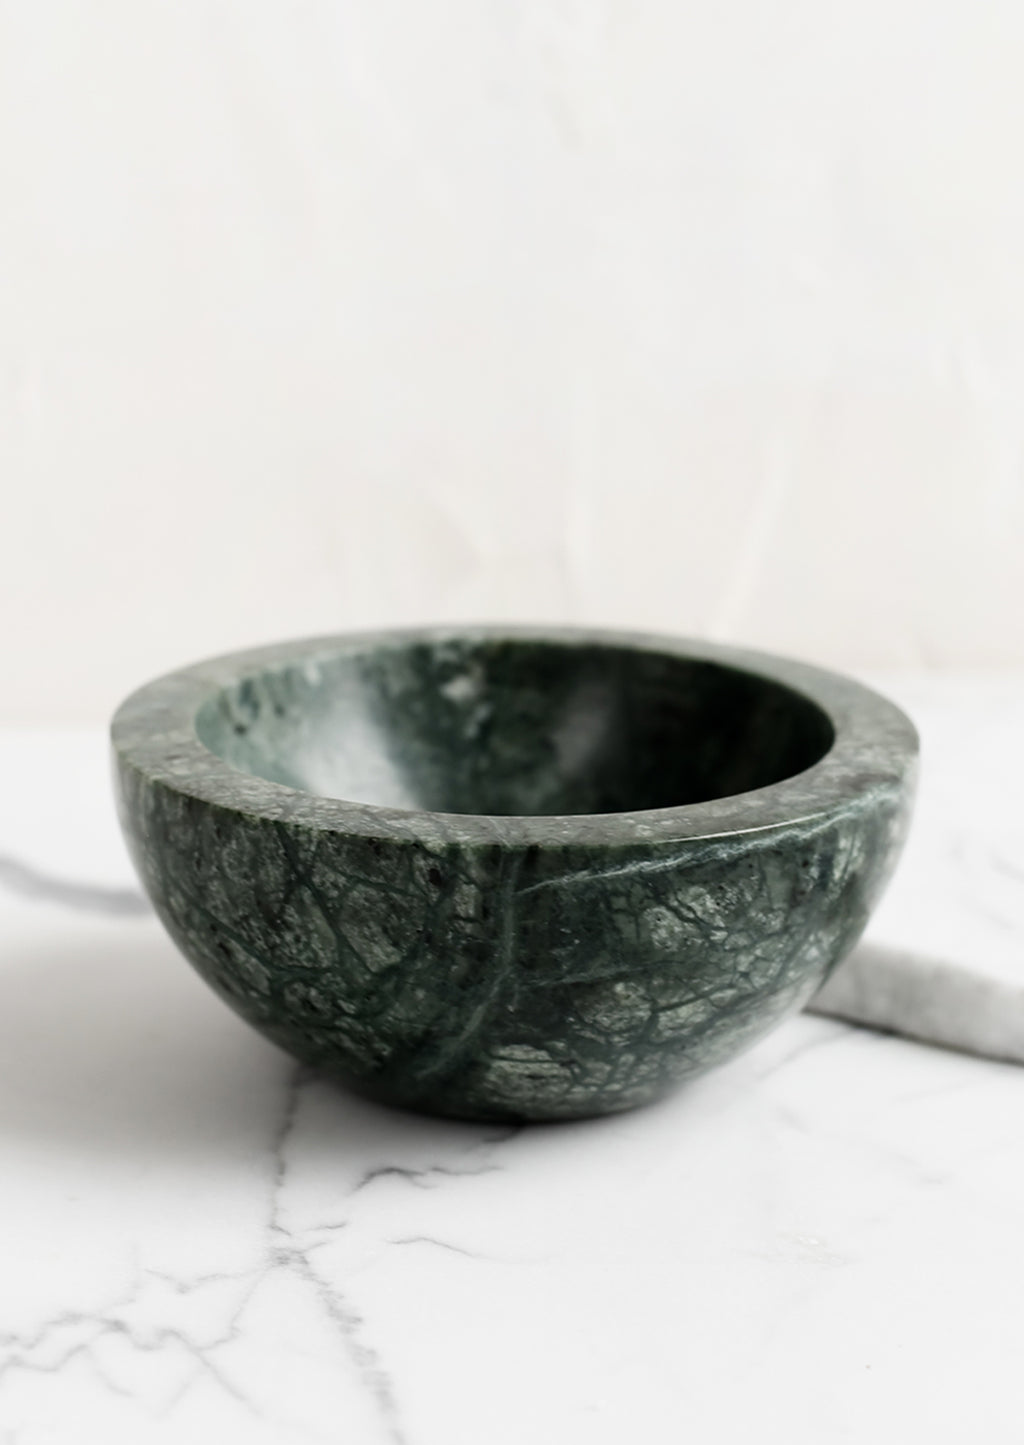 Green: A small green marble bowl.